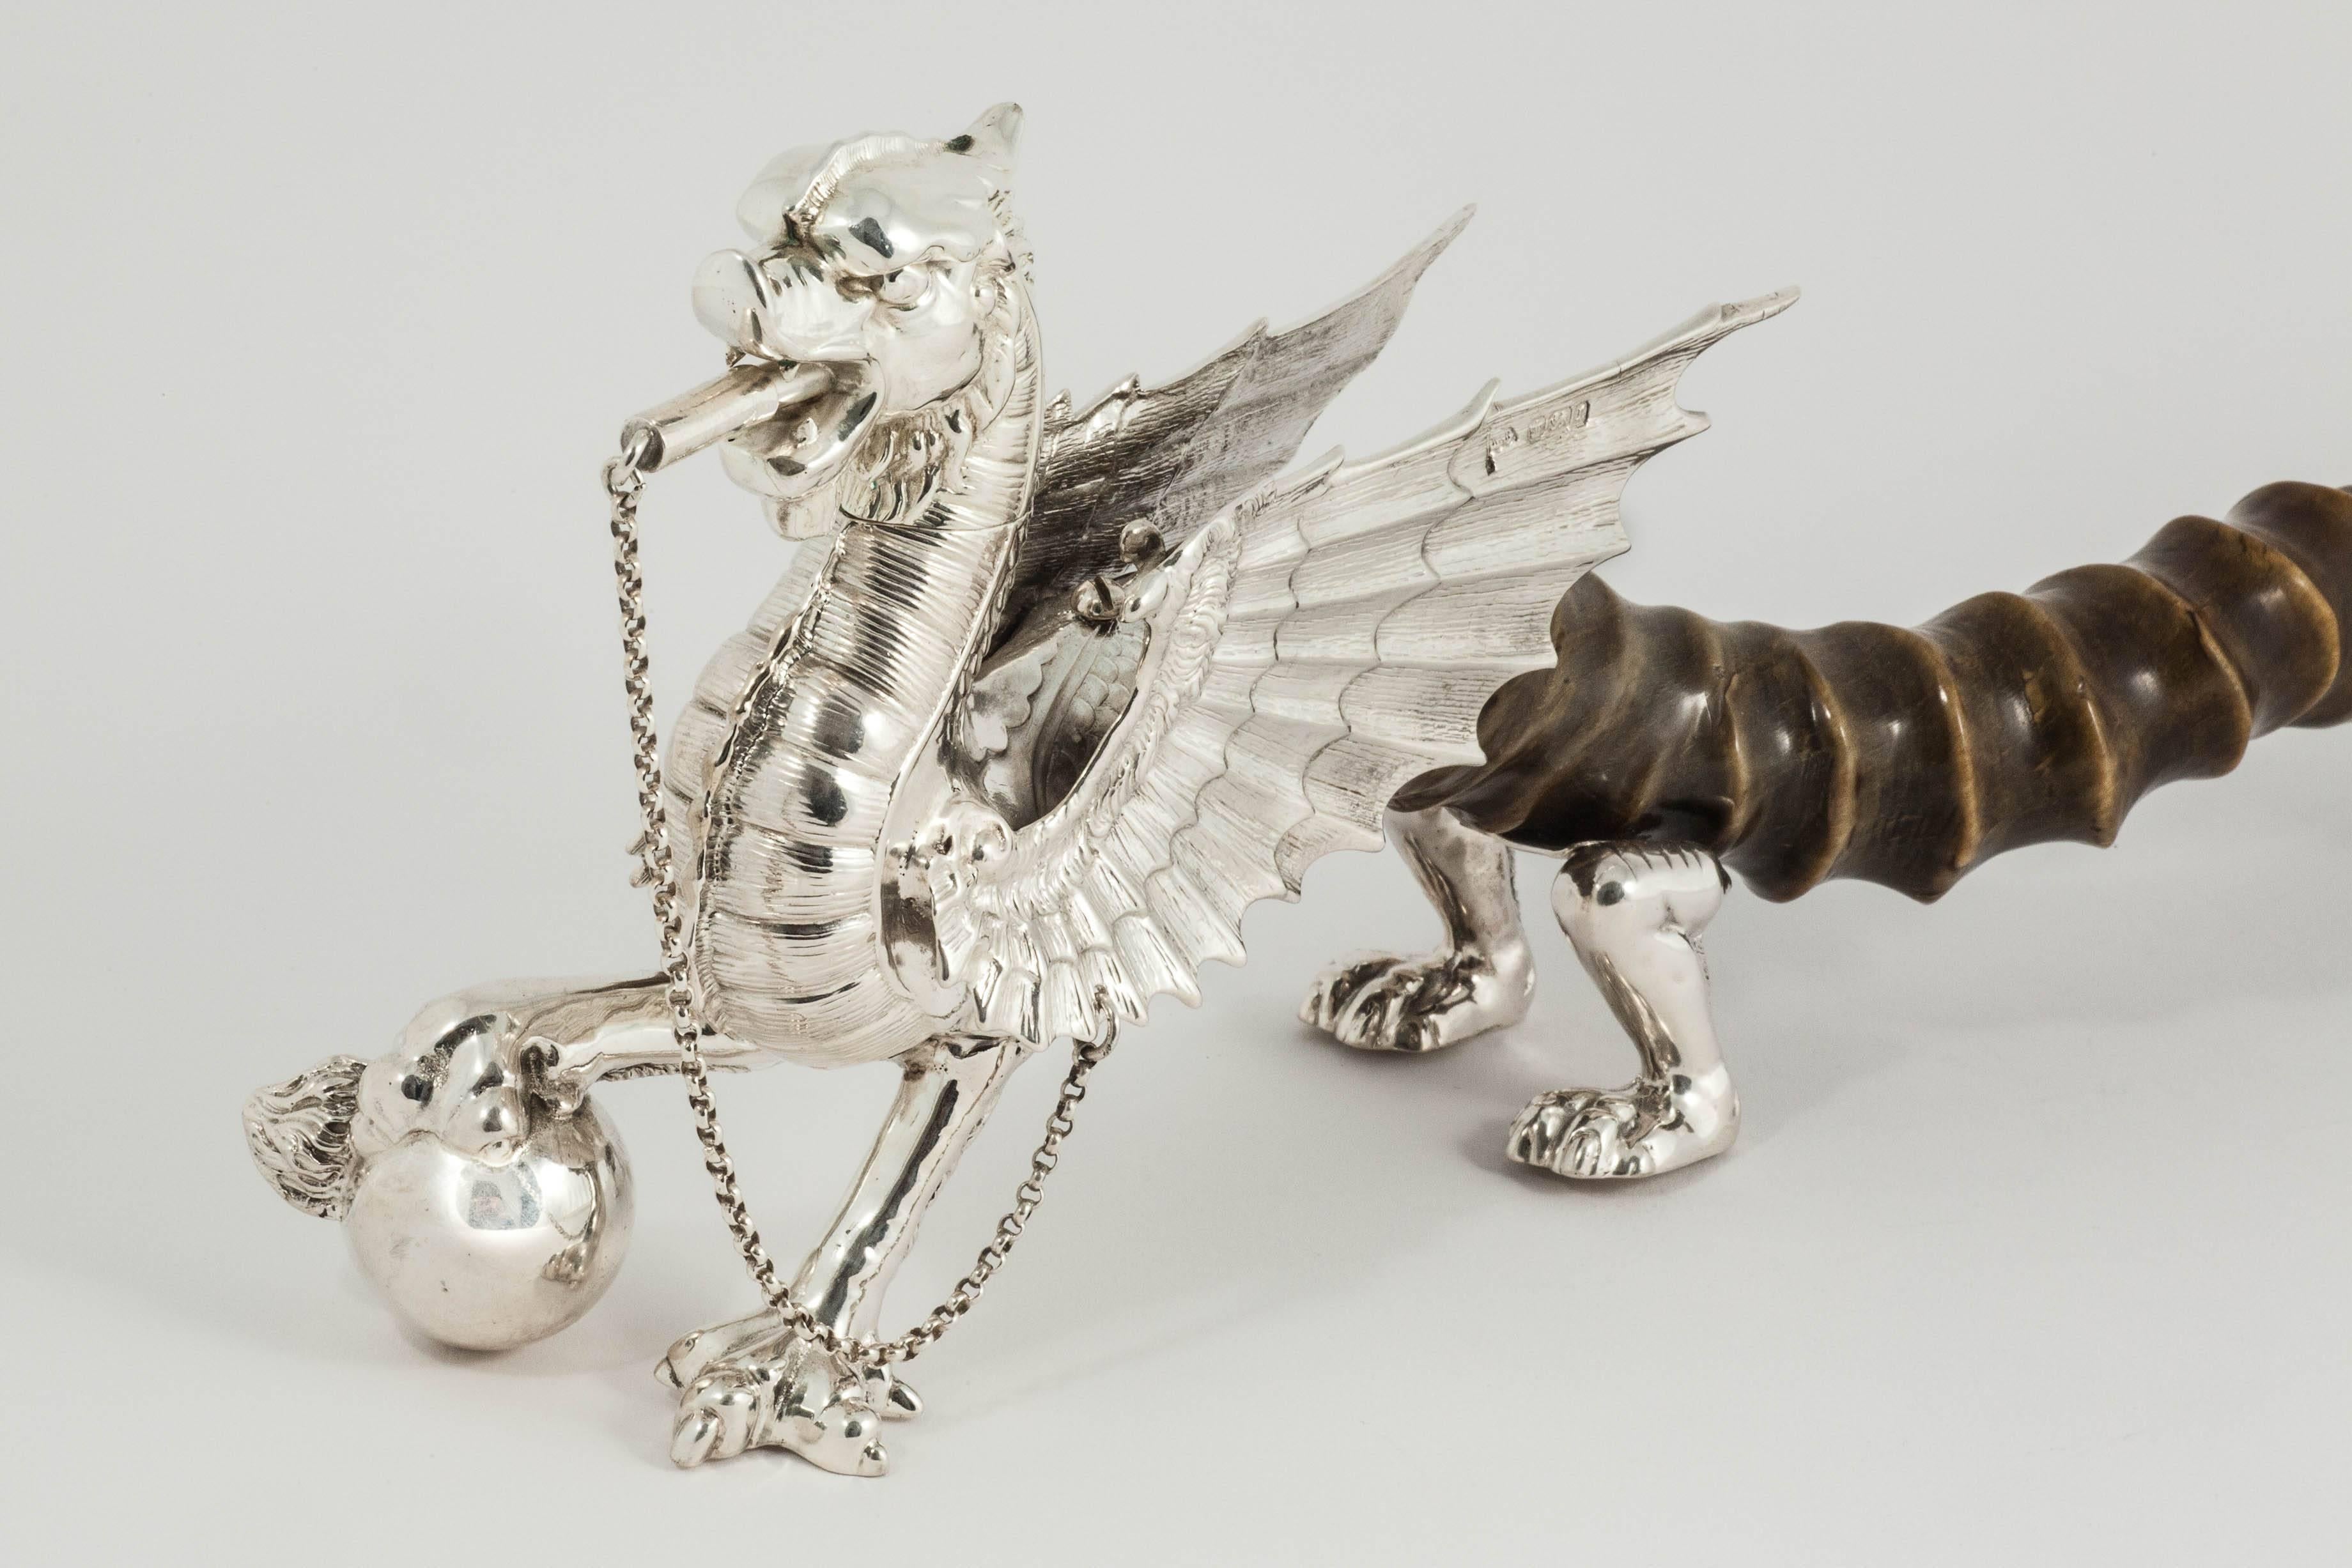 A very rare antique silver table lighter in the form of a dragon with antelope horn for its body and tail. This style of cigar lighter, typically made for a military mess table, was almost always made in silver-plate and it is incredibly rare to